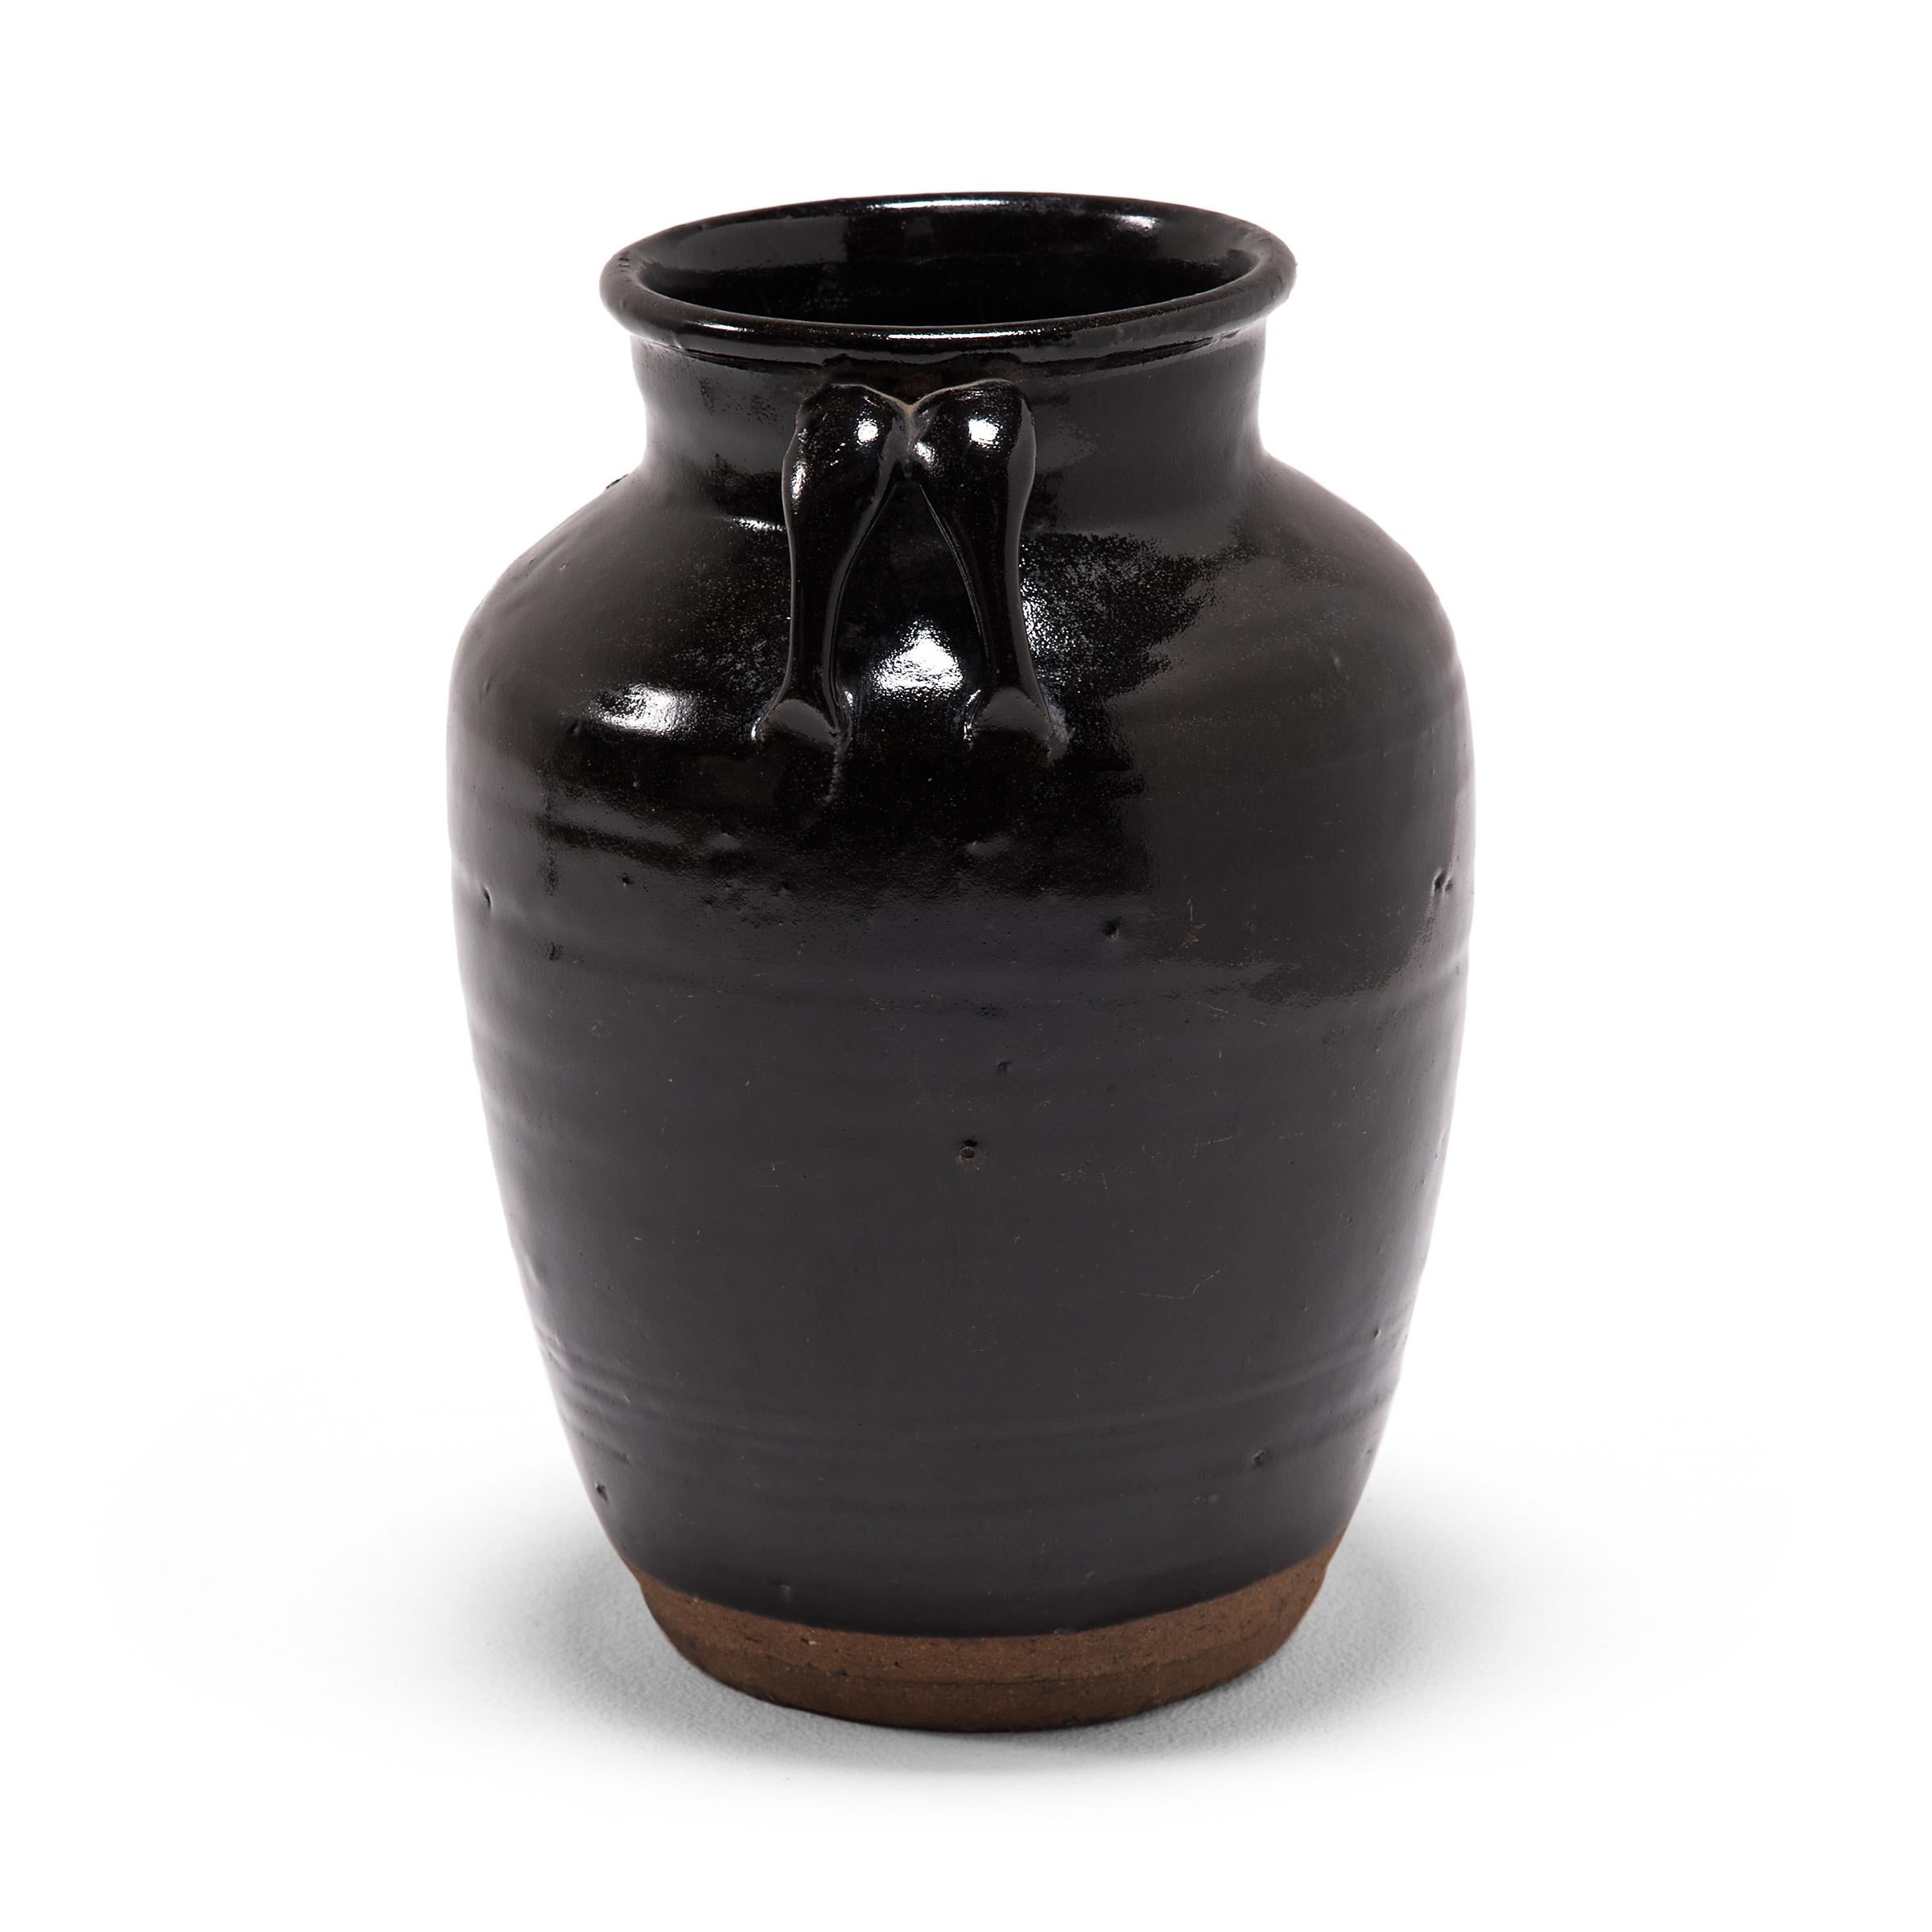 As though slicked with oil, an inky black glaze drenches the high shoulders and arched double strap handles of this tapered kitchen vessel. The 19th century ceramic jar was once used to prepare and store soy sauce in a Qing-dynasty kitchen, as